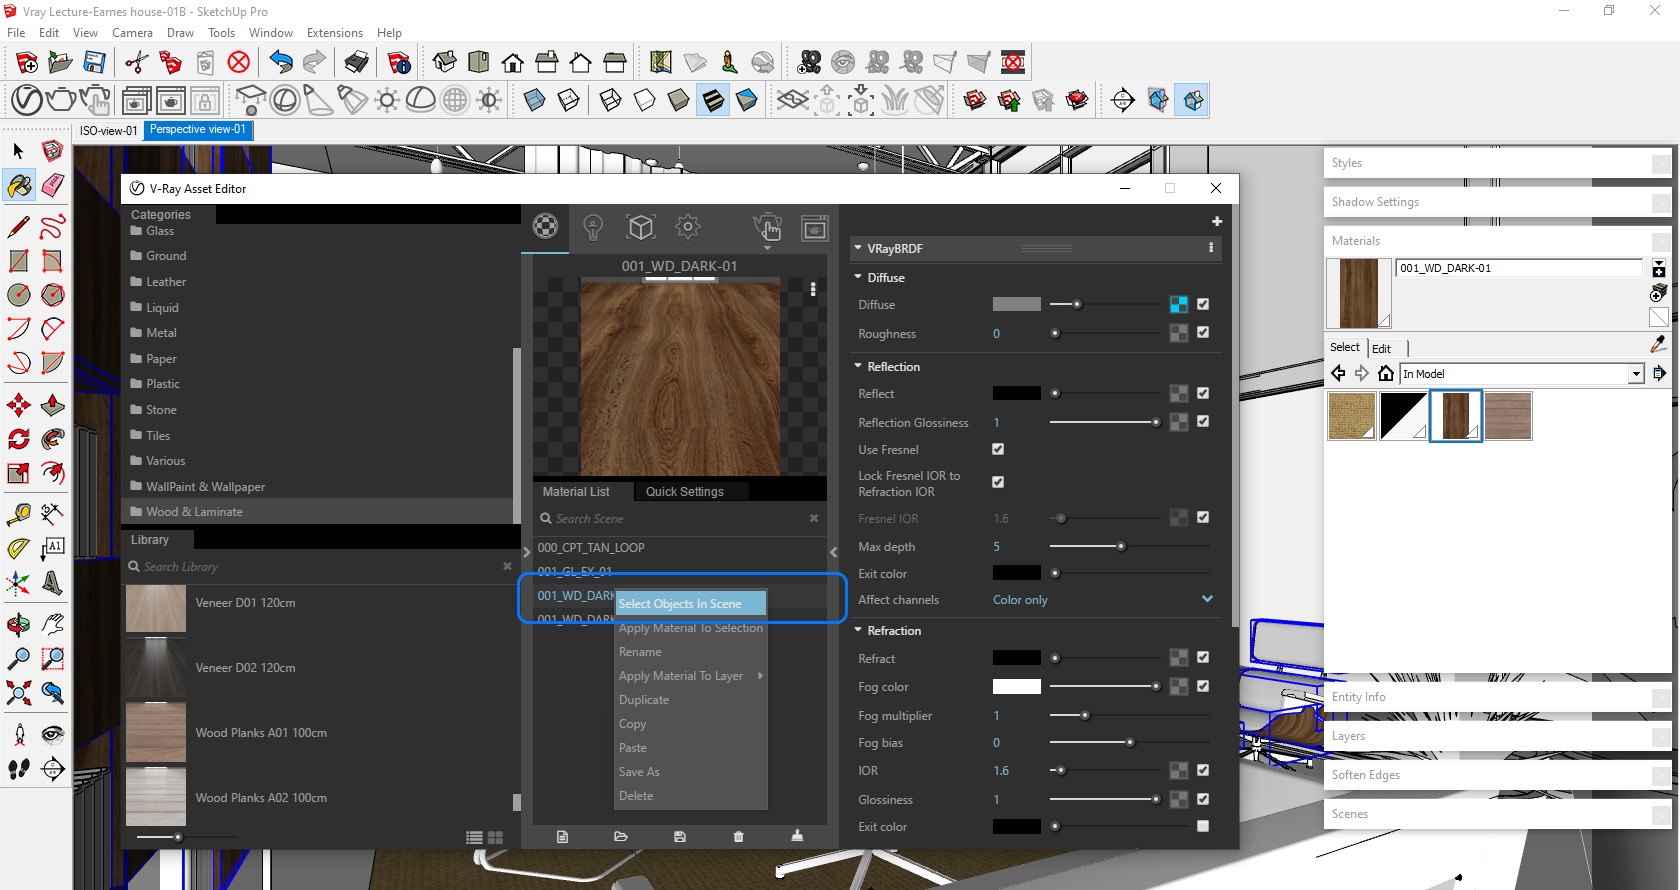 It indicates how to select SketchUp elements with a material using V-Ray asset editor.